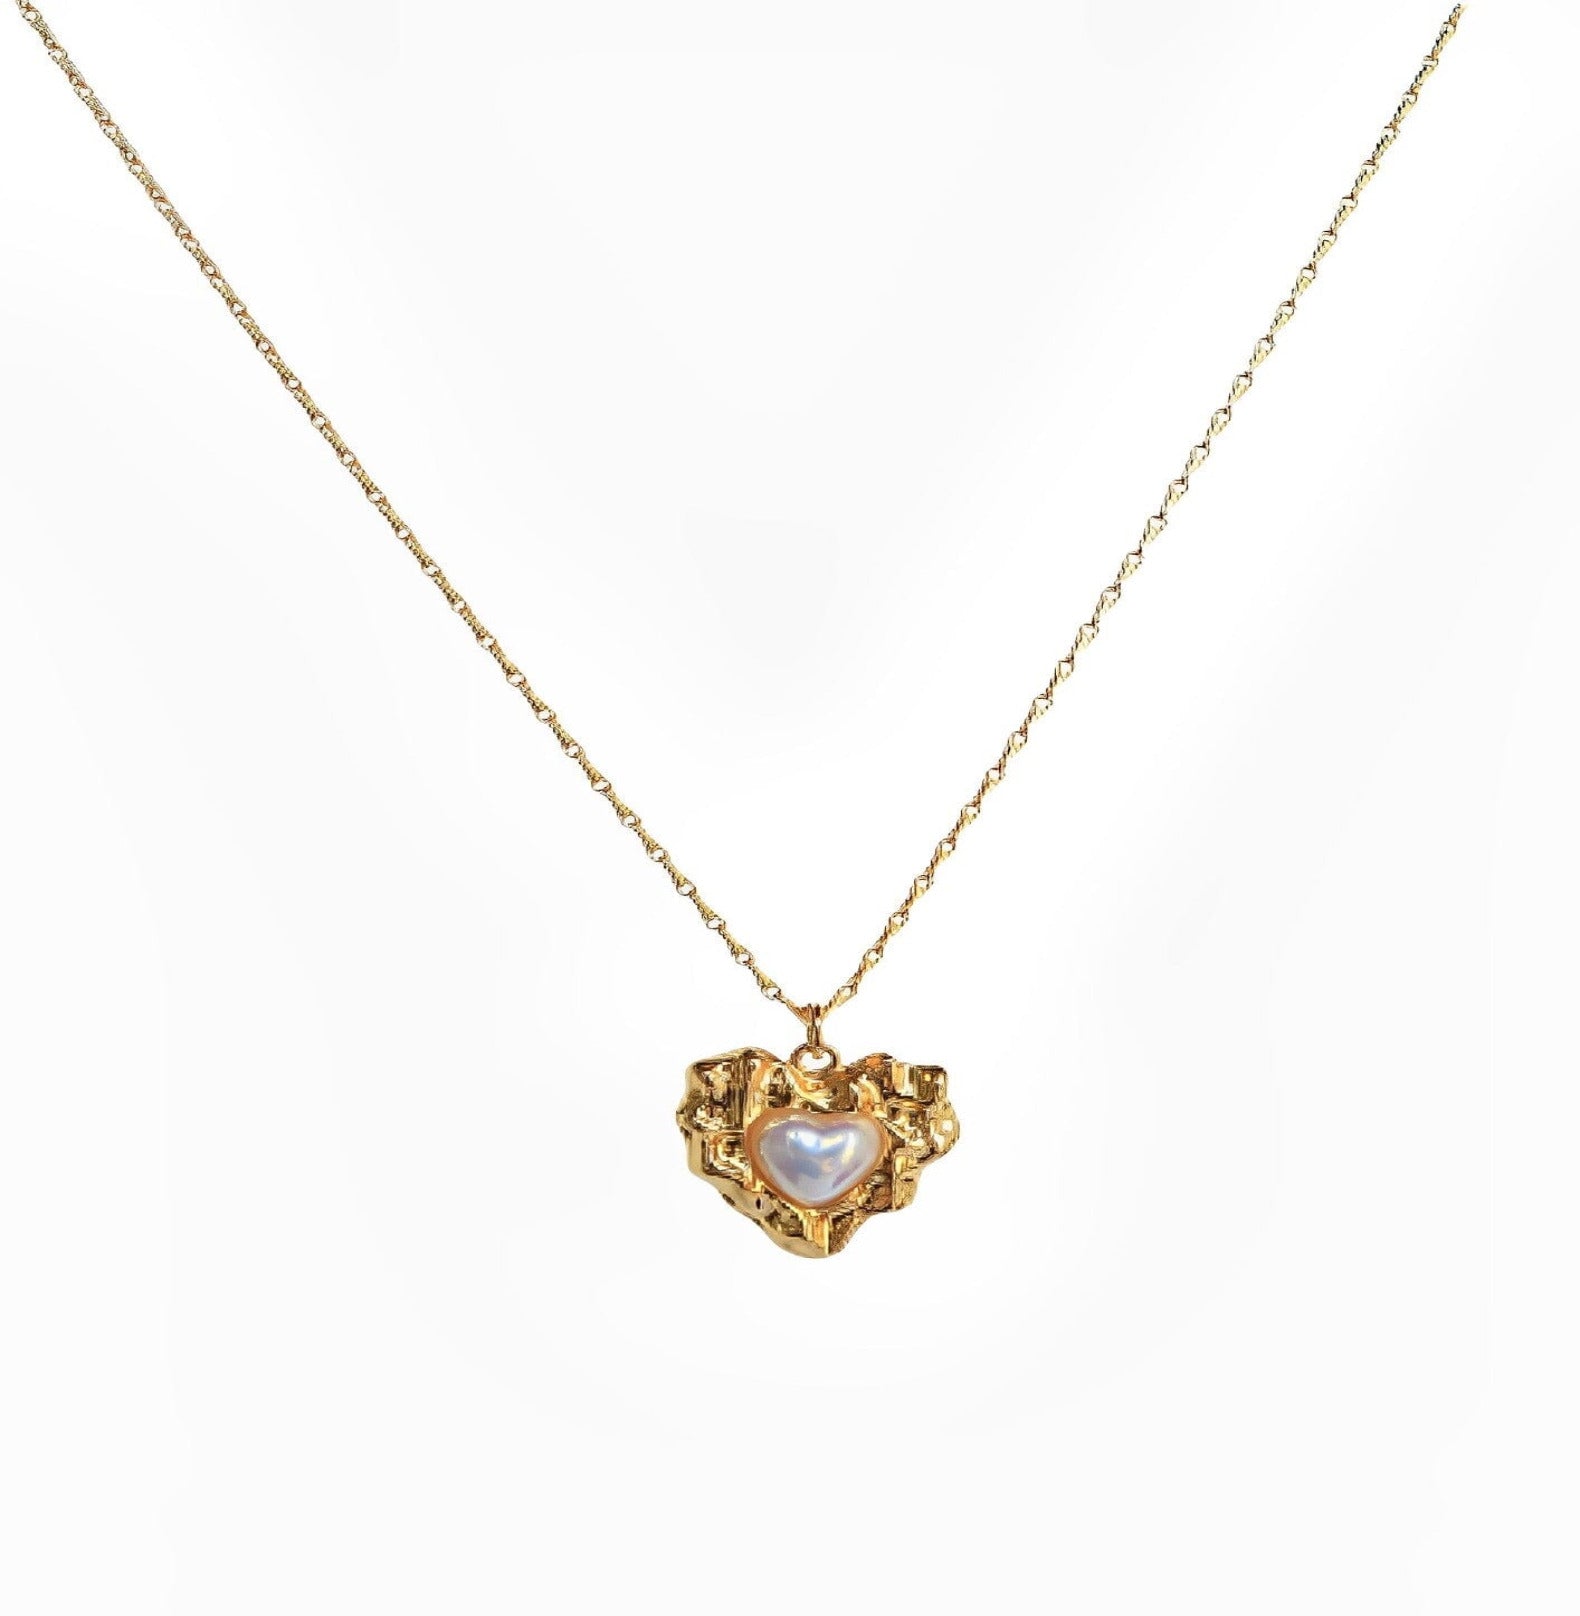 PEARL HEART NECKLACE neck Yubama Jewelry Online Store - The Elegant Designs of Gold and Silver ! 